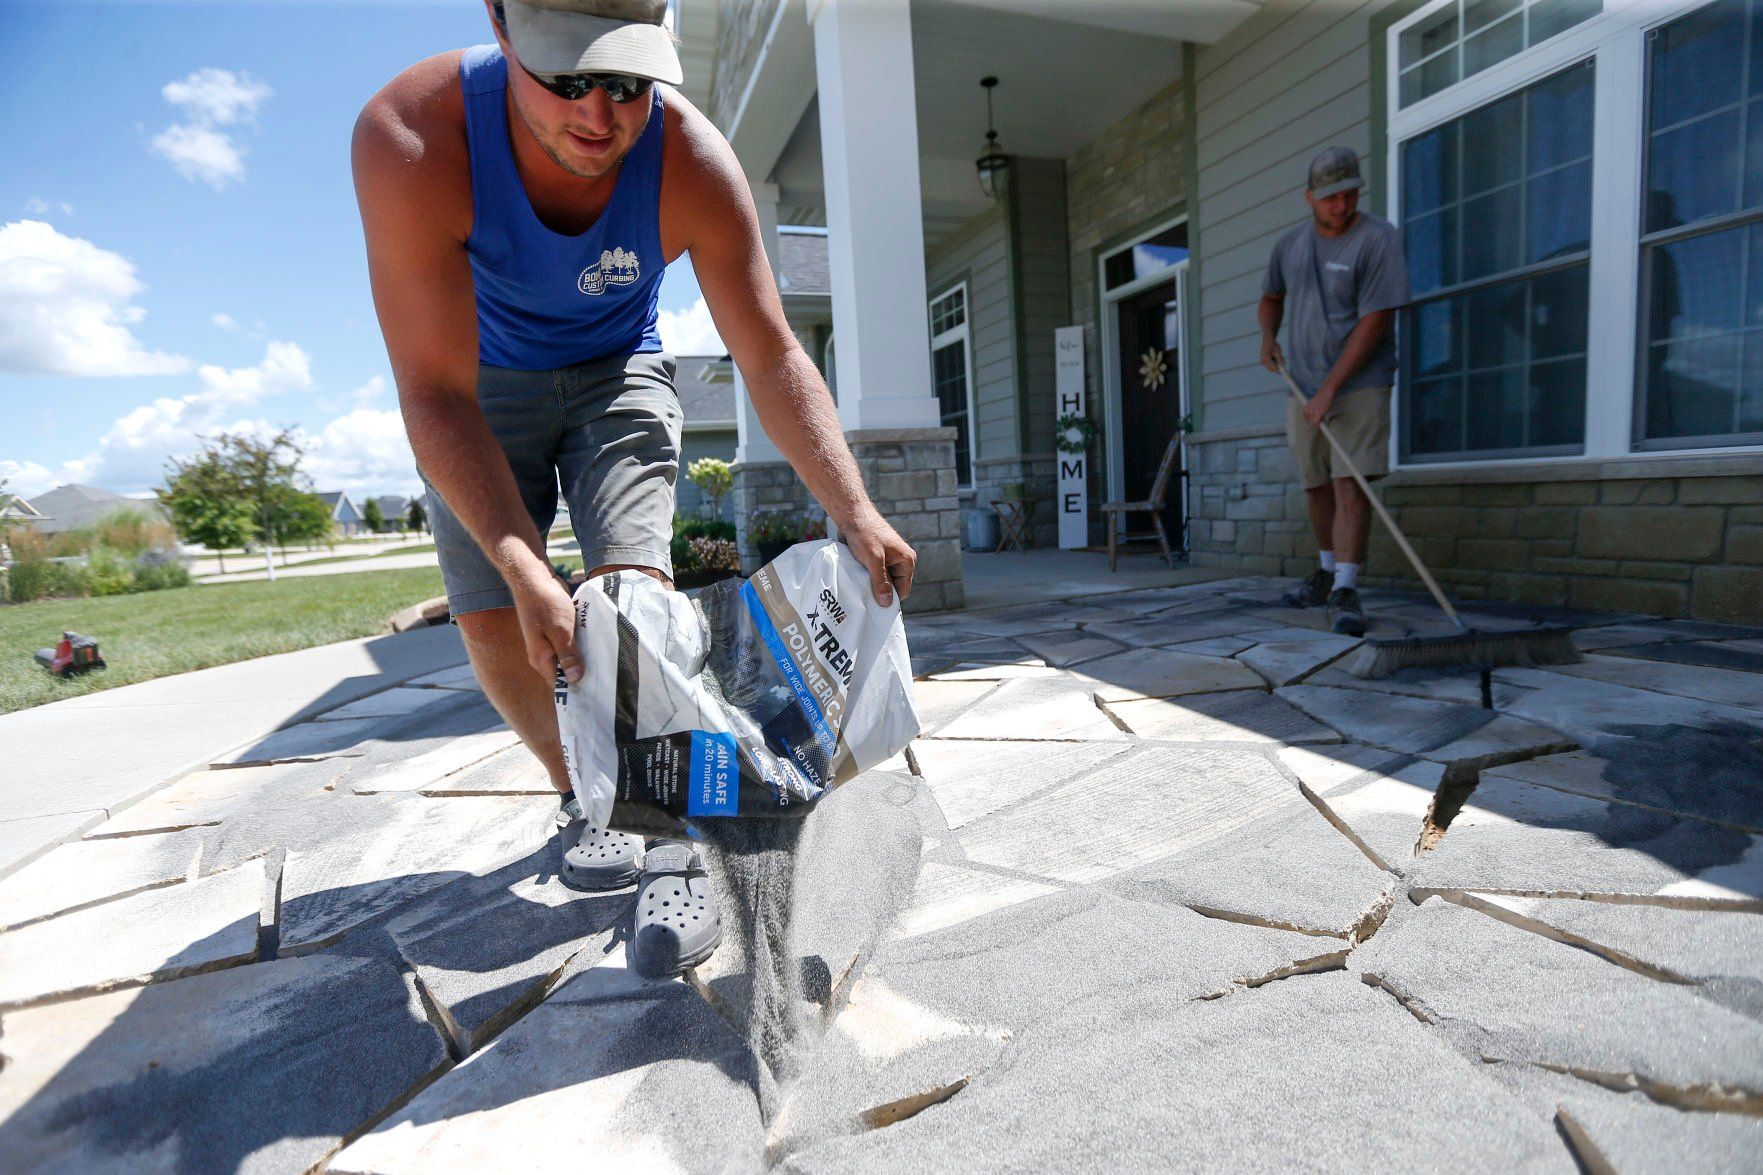 Jake Bohr, owner of Cornerstone Nursery in Dubuque, works on a landscaping project in Dubuque on Friday. Bohr opened his business earlier this year. “It’s hard, and there’s a lot of stress,” Bohr said. “But I’ve never really been good at having a lot of people tell me what to do, so I needed to be my own boss, and it’s been awesome.”    PHOTO CREDIT: Dave Kettering